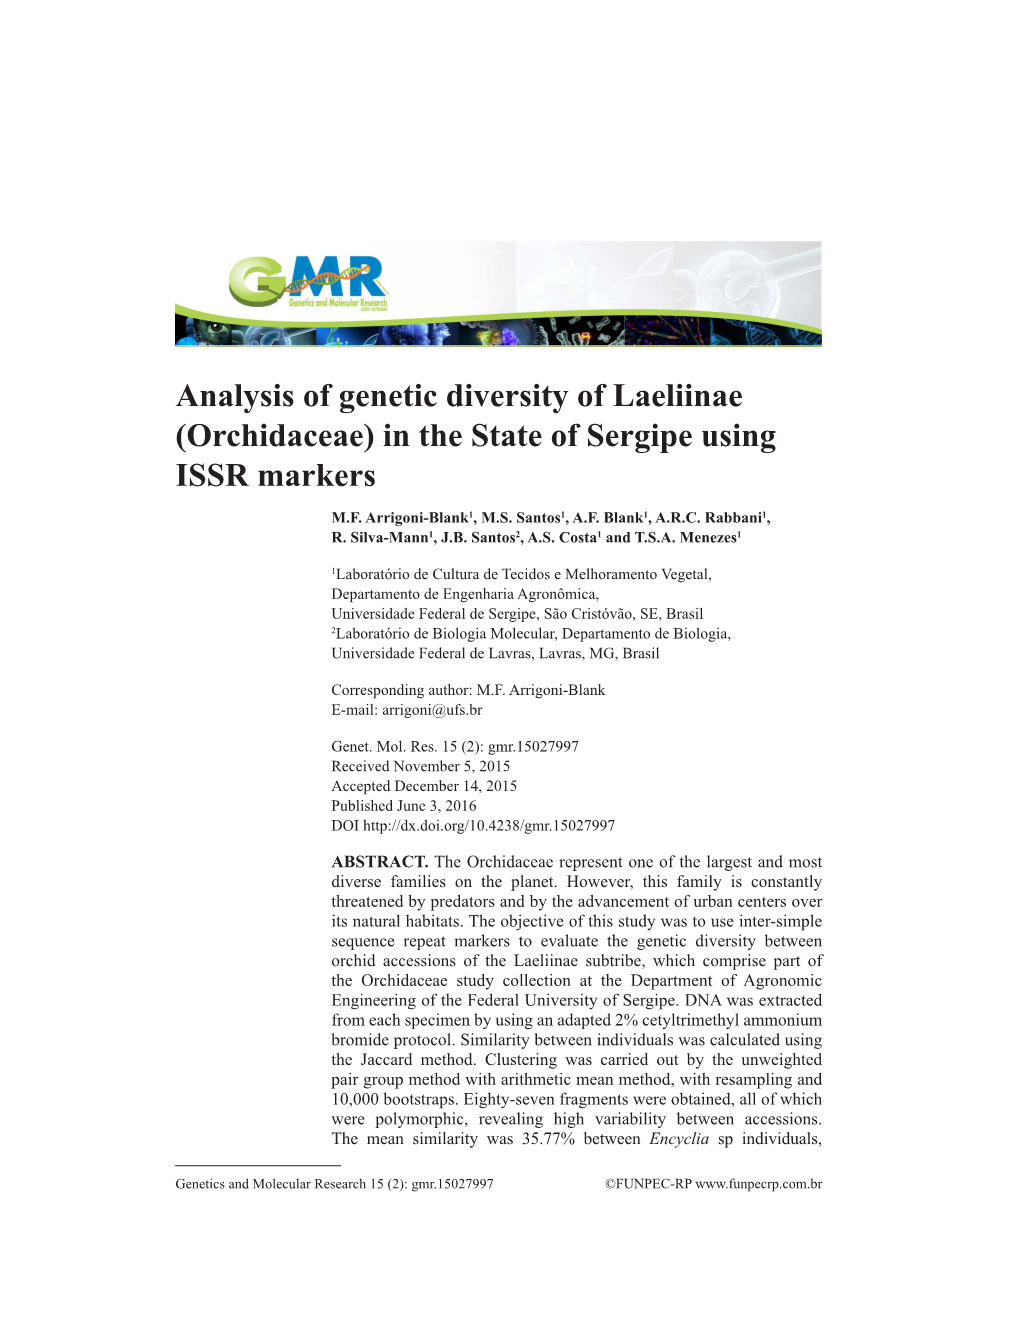 Analysis of Genetic Diversity of Laeliinae (Orchidaceae) in the State of Sergipe Using ISSR Markers